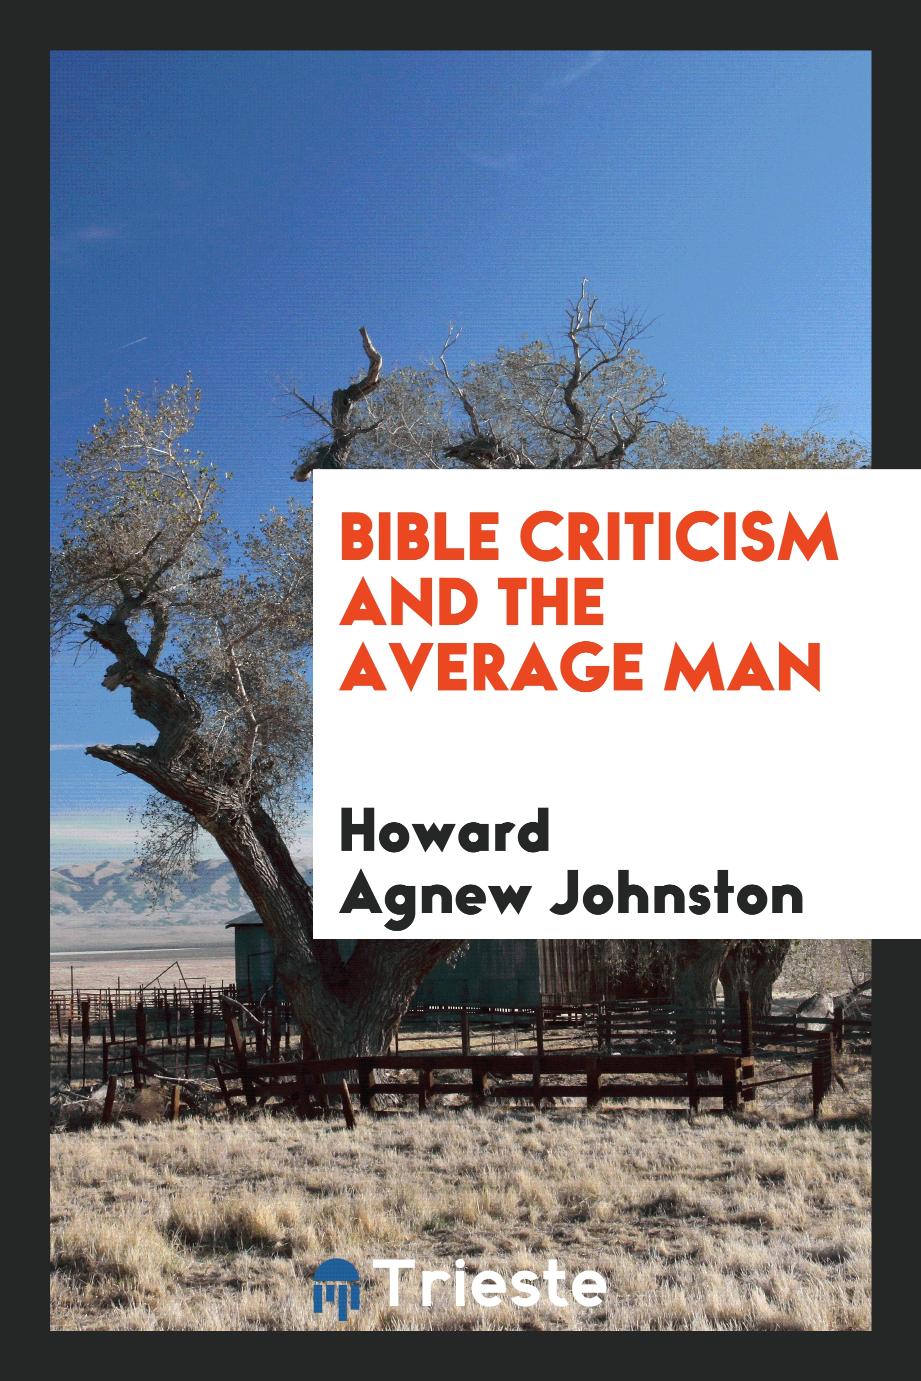 Bible criticism and the average man